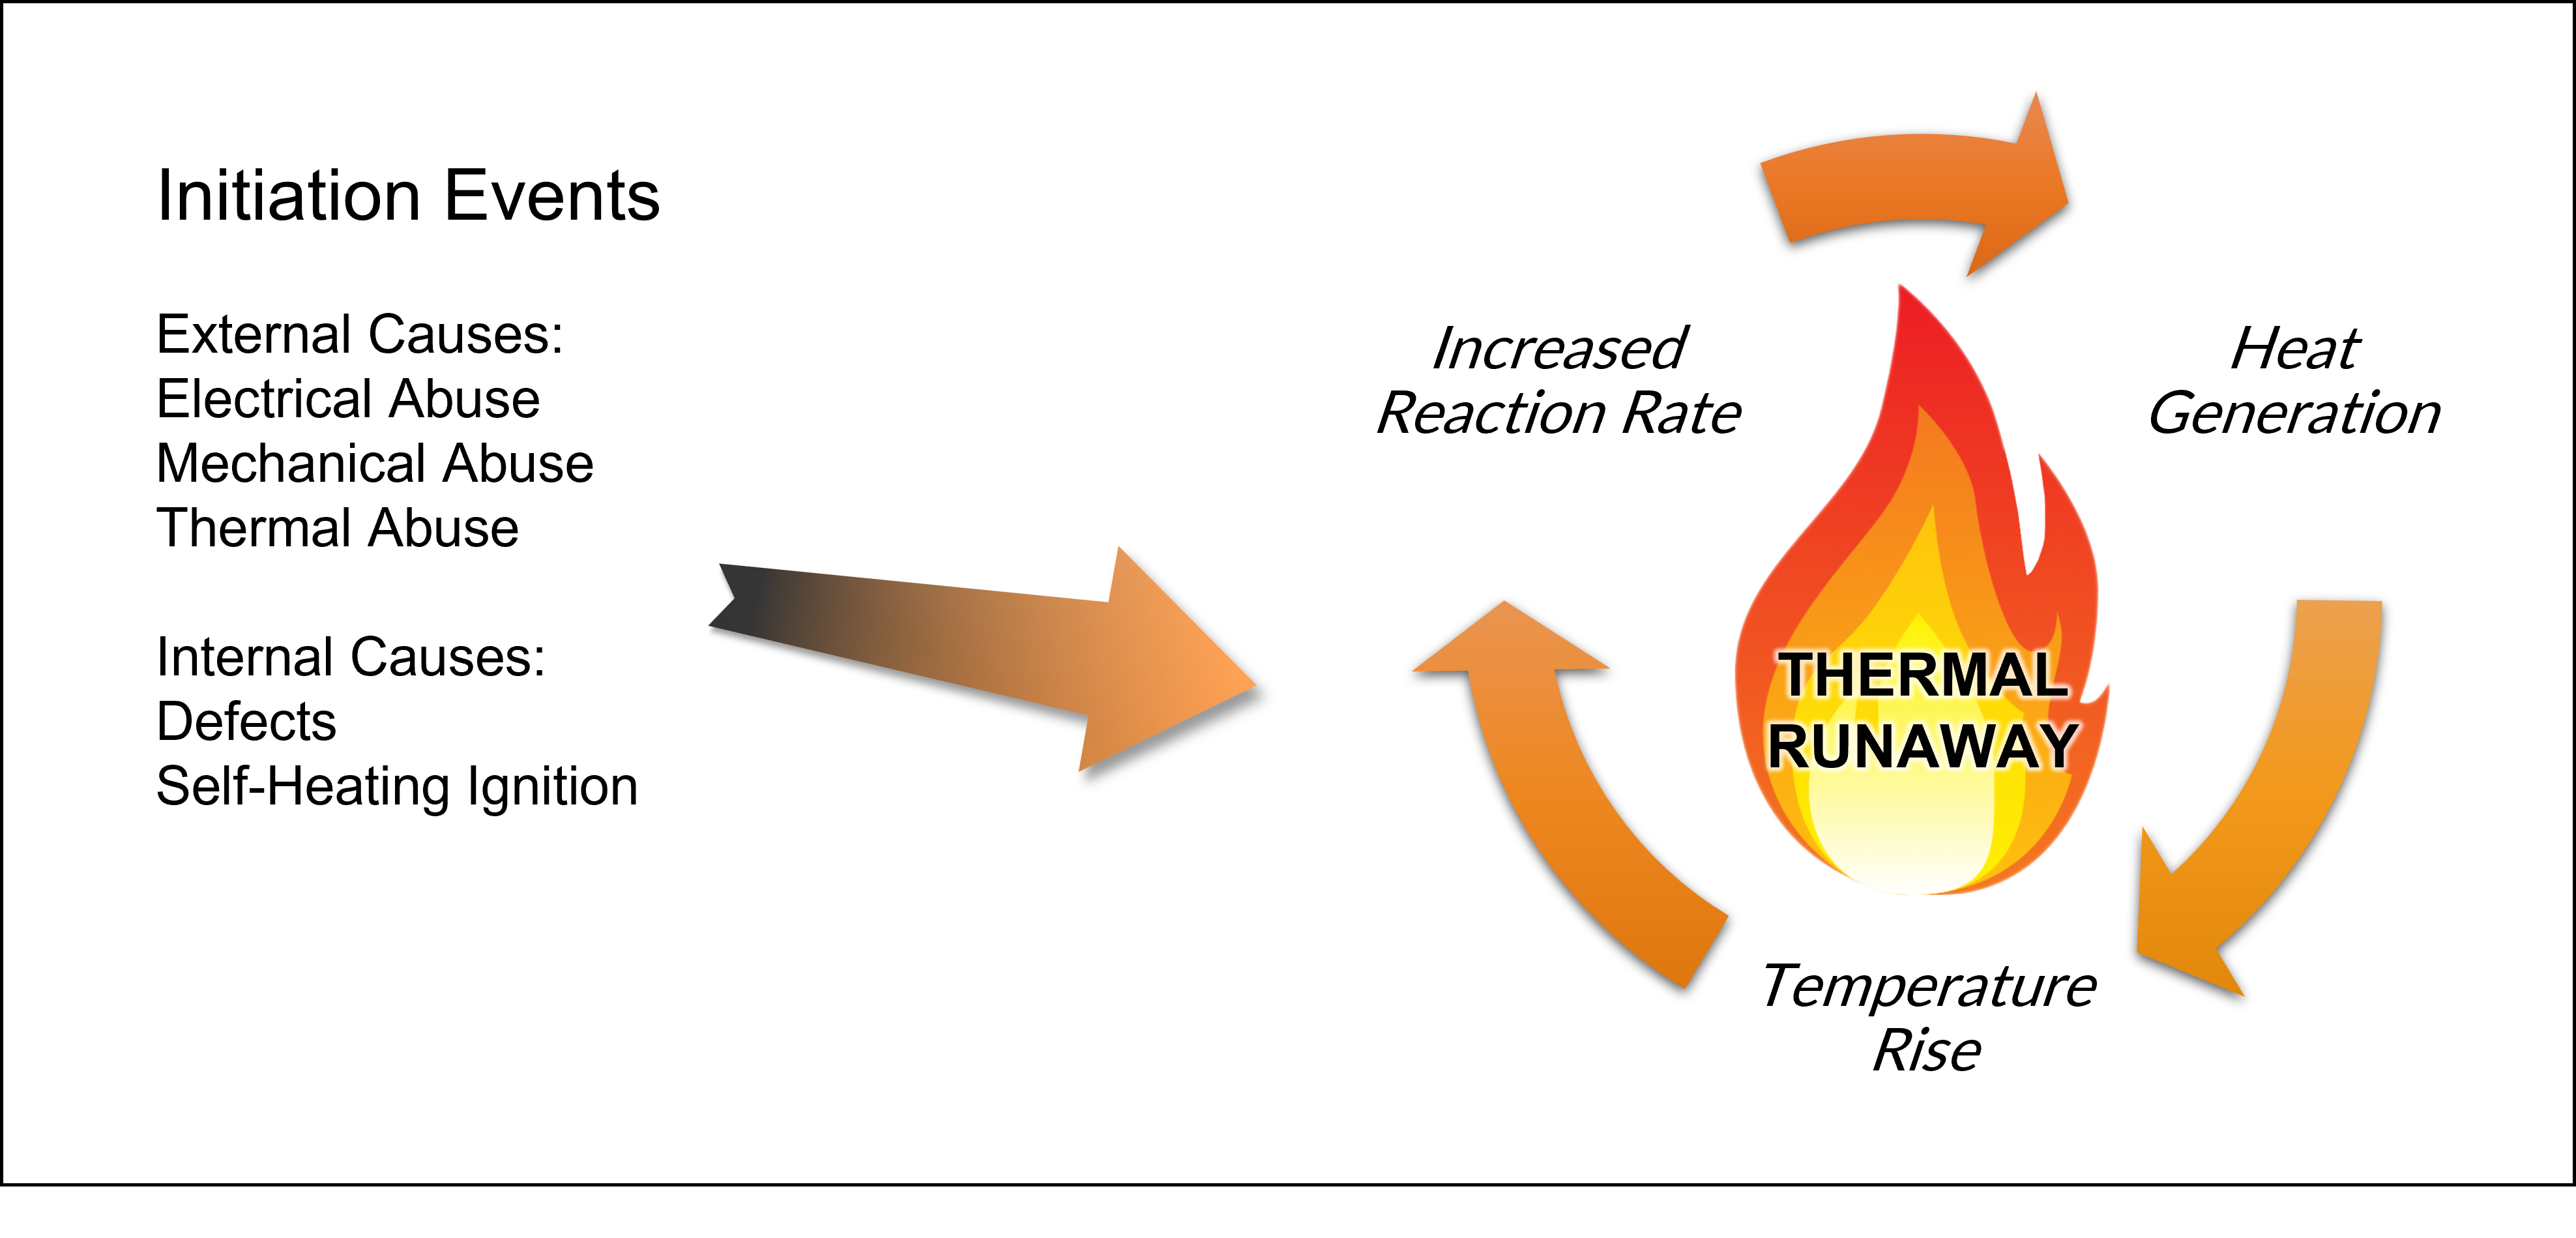 Battery Thermal Runaway Cycle Initiation Events